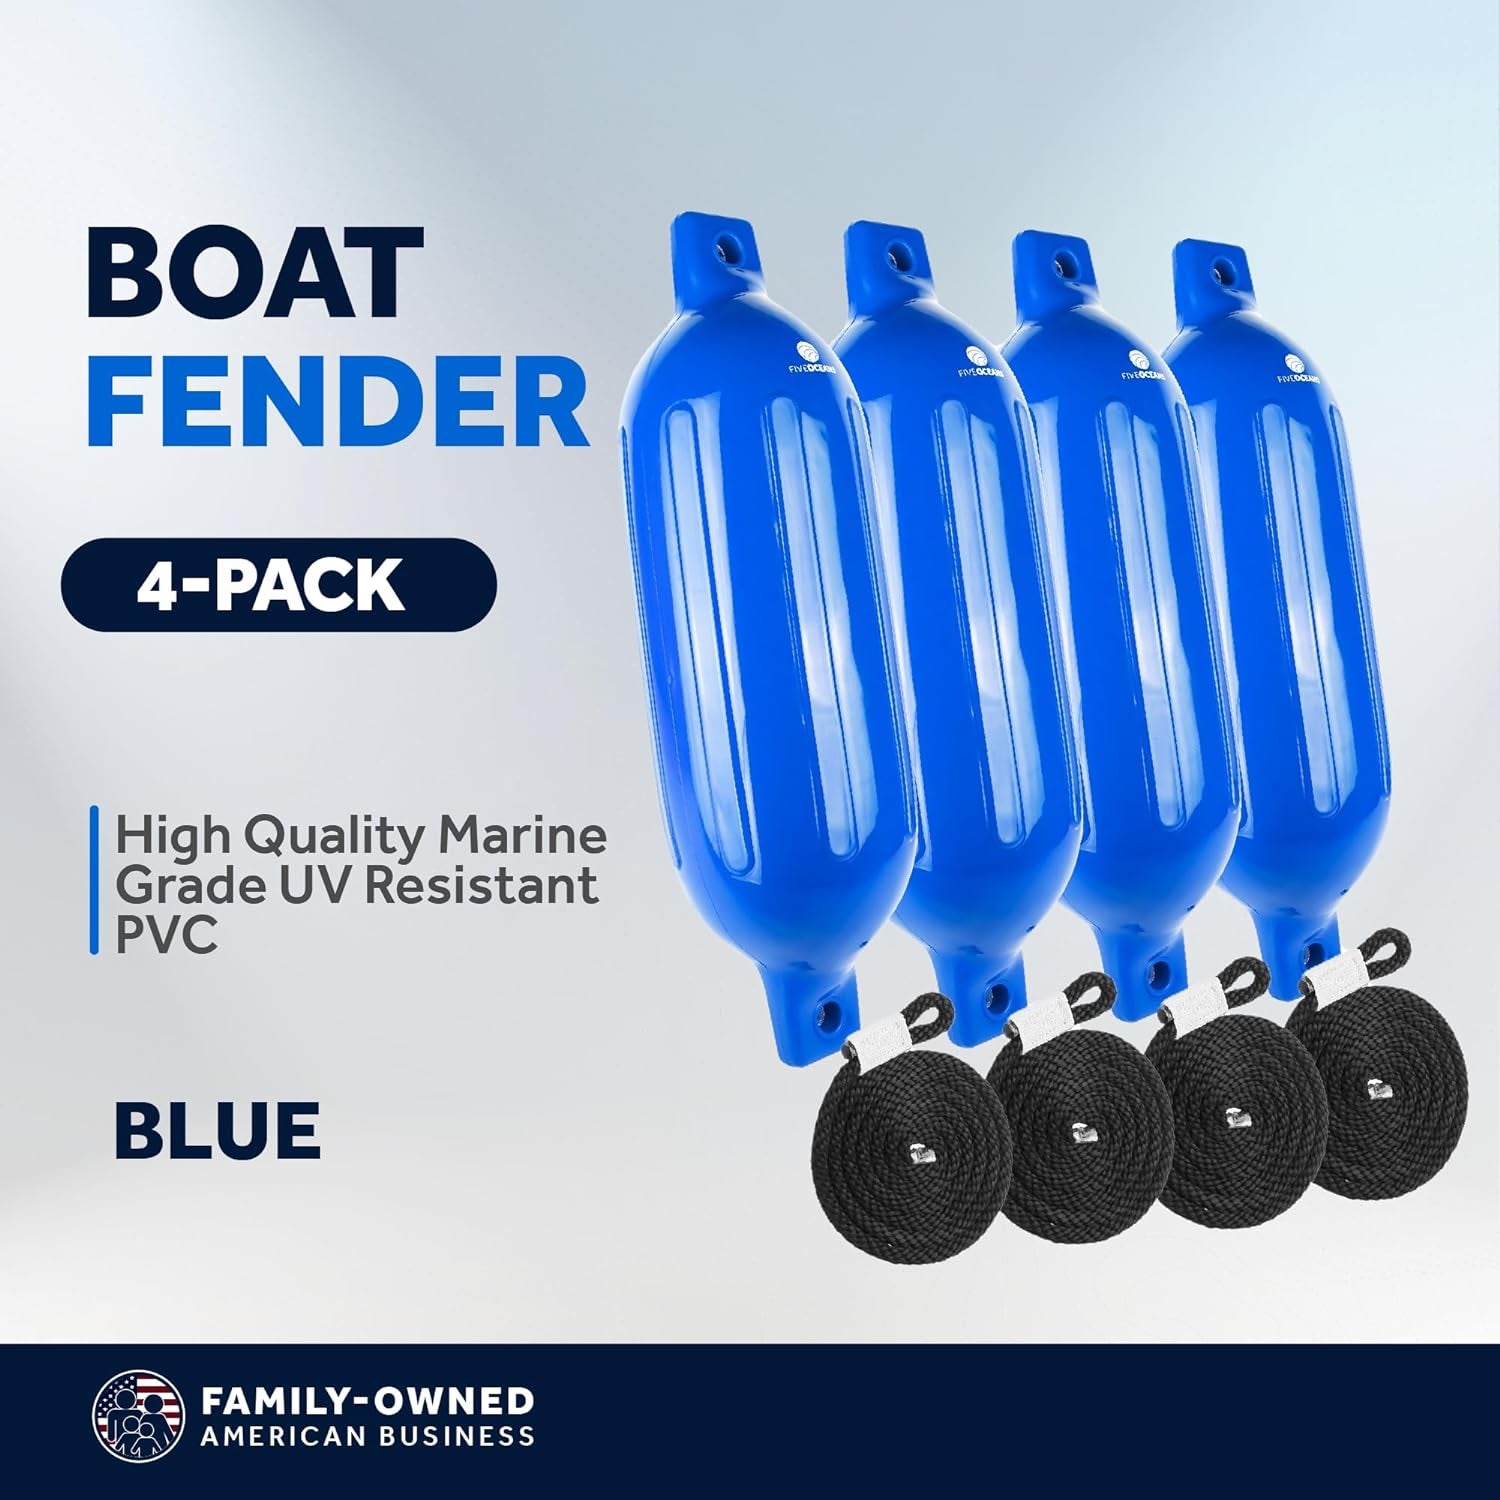 4-Pack Boat Fenders - Boat Bumpers for Docking - 4 Ropes Lines 3/8-Inch X 5-Foot - Boat Fender with Inflator Pump and 4 Needles for Pontoon Fishing Boats Bass Boats Sport Boats Sailboats